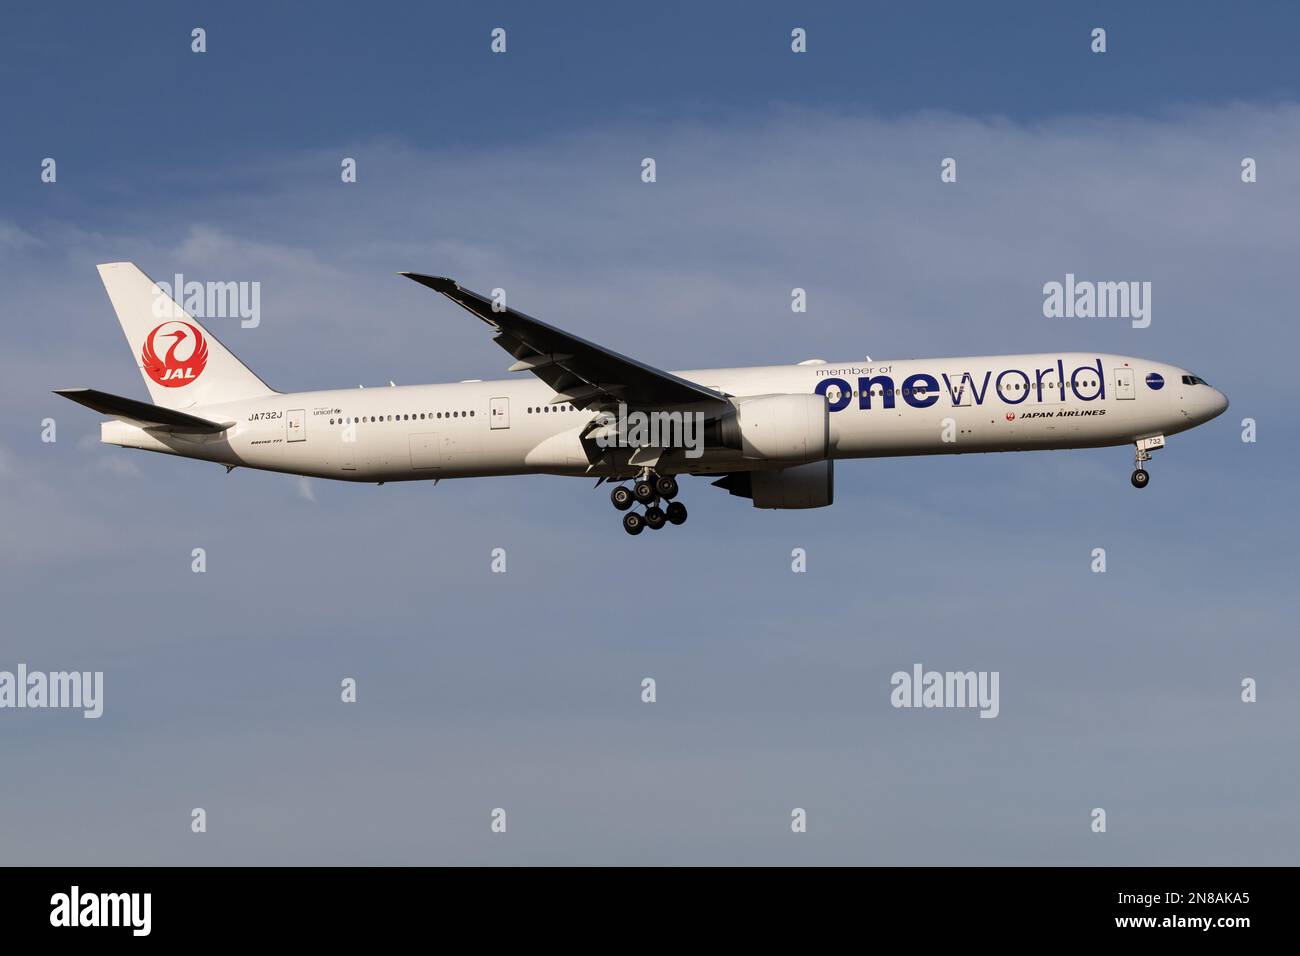 A Japan Airlines (JAL) Boeing 777, wearing a special One World livery, lands at London Heathrow Airport in 2023 Stock Photo